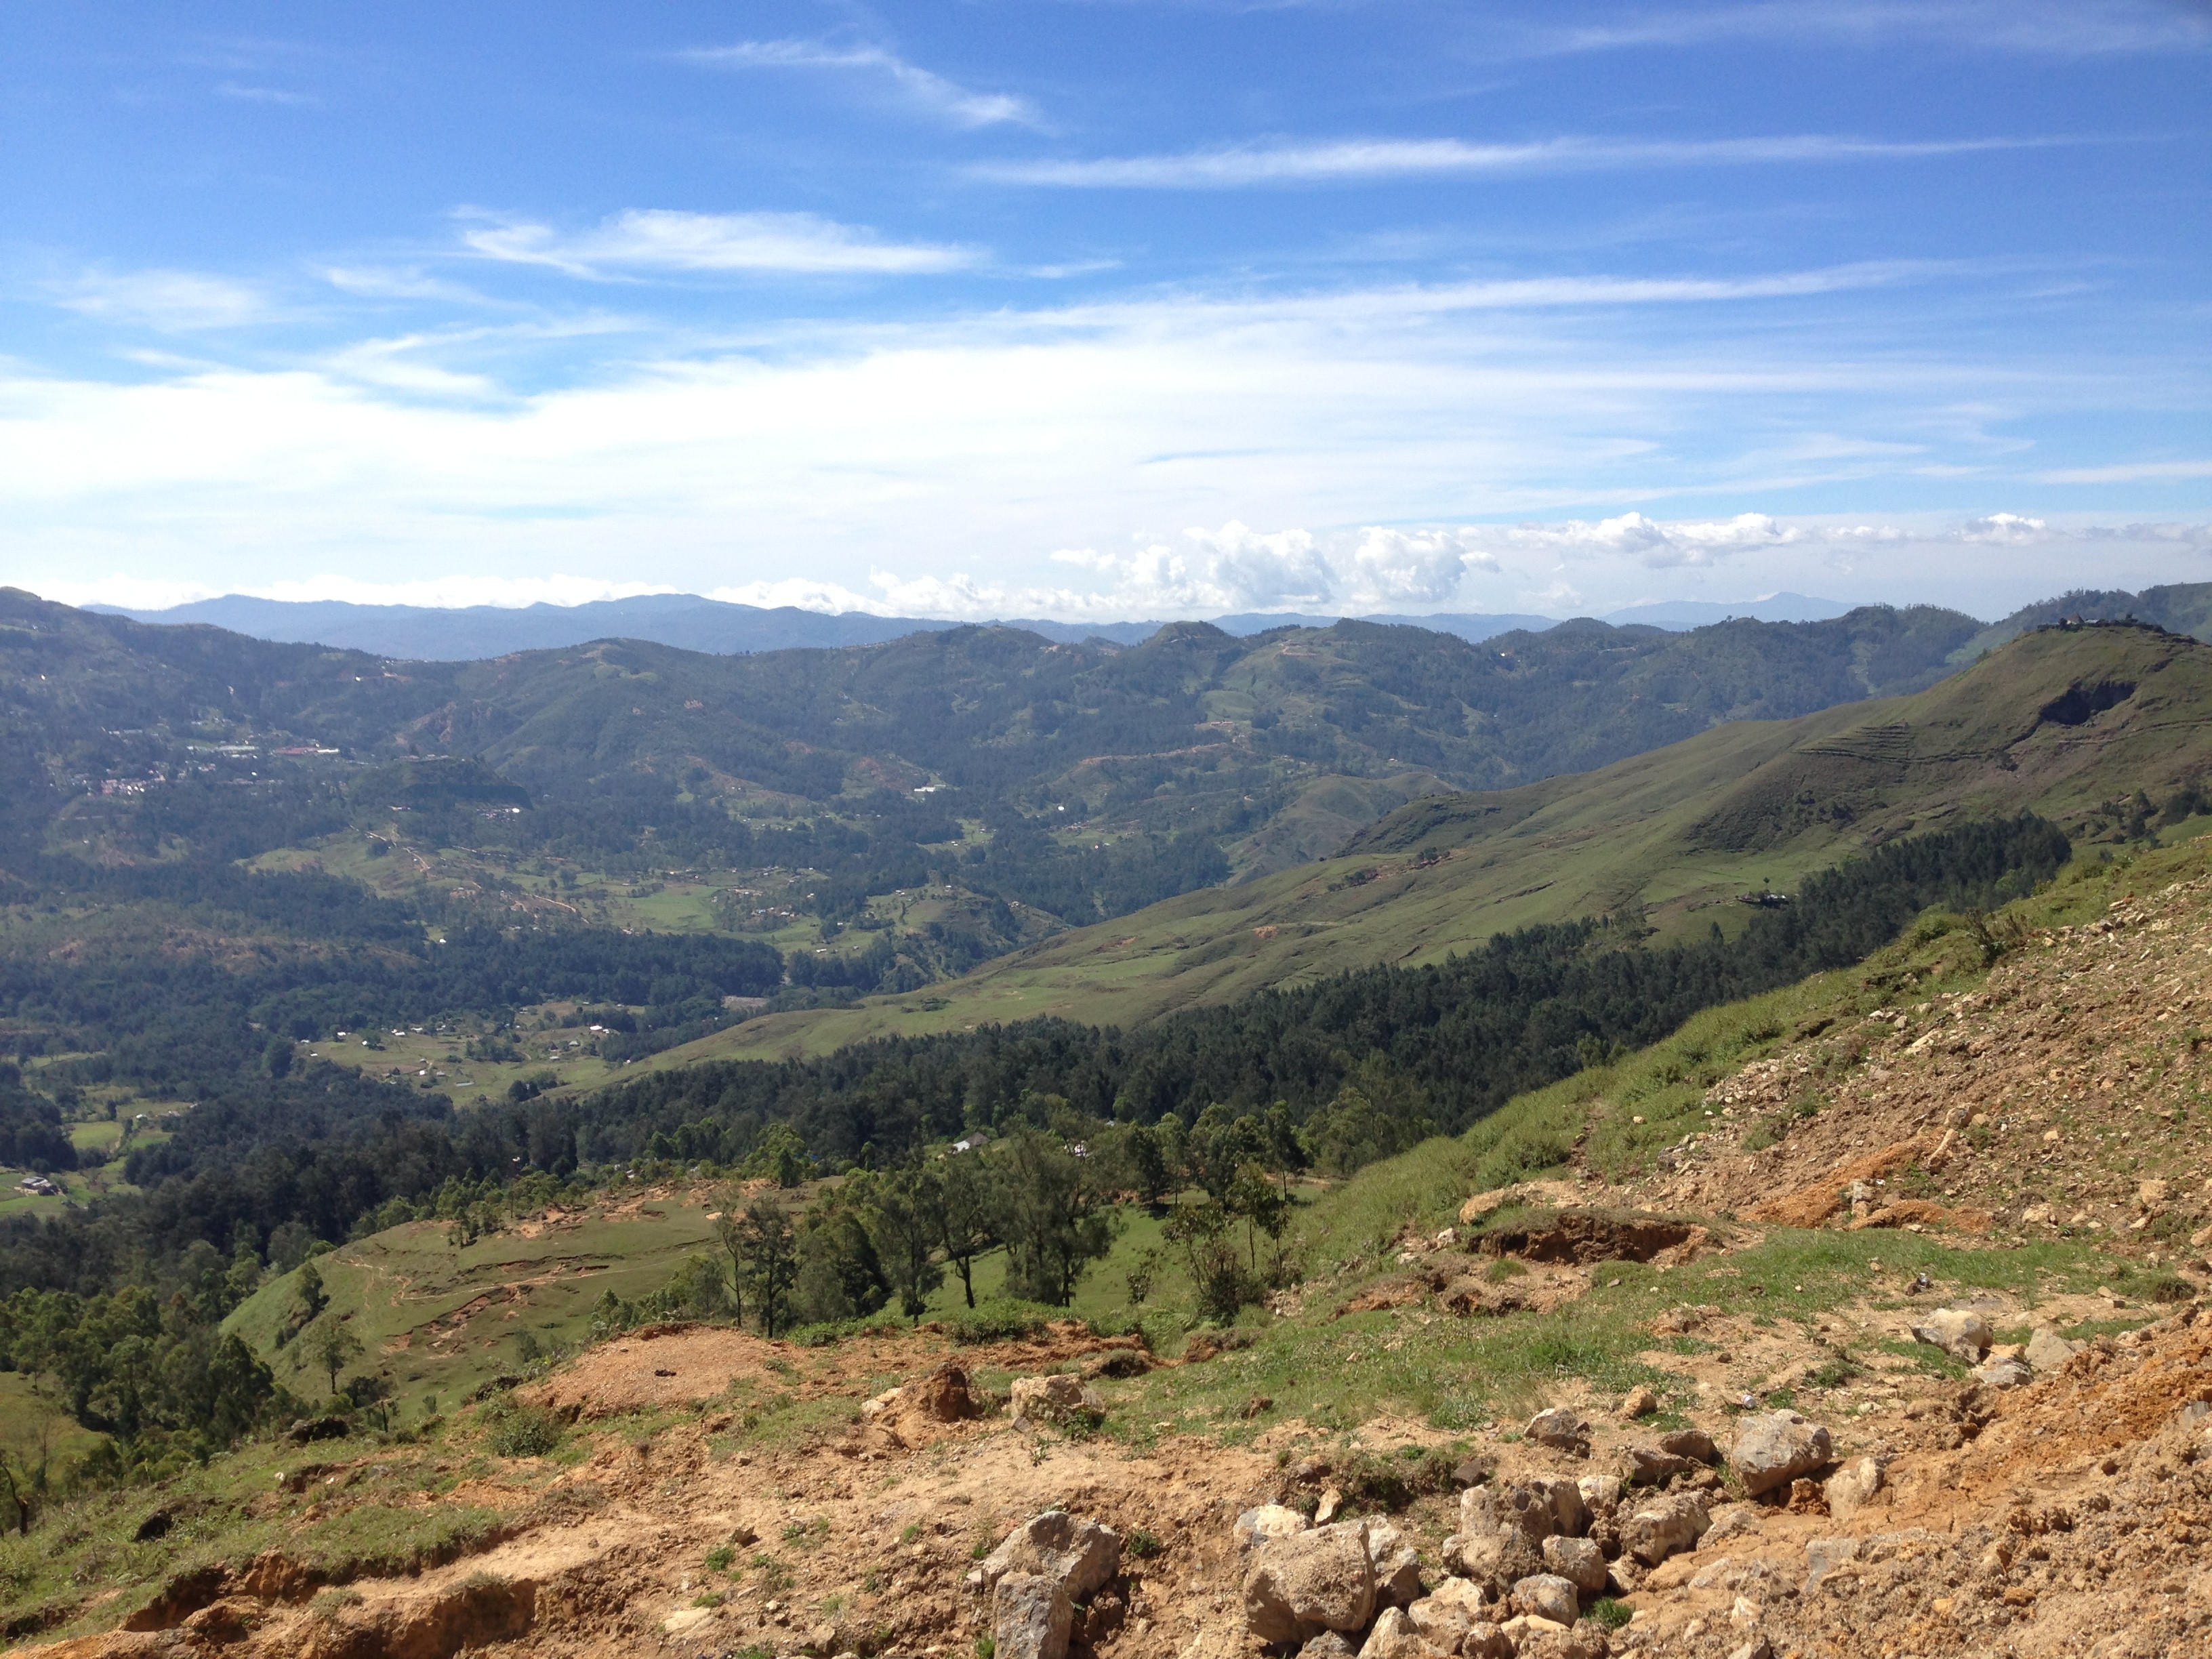 Could be the Bega Valley, the hills of Timor Leste